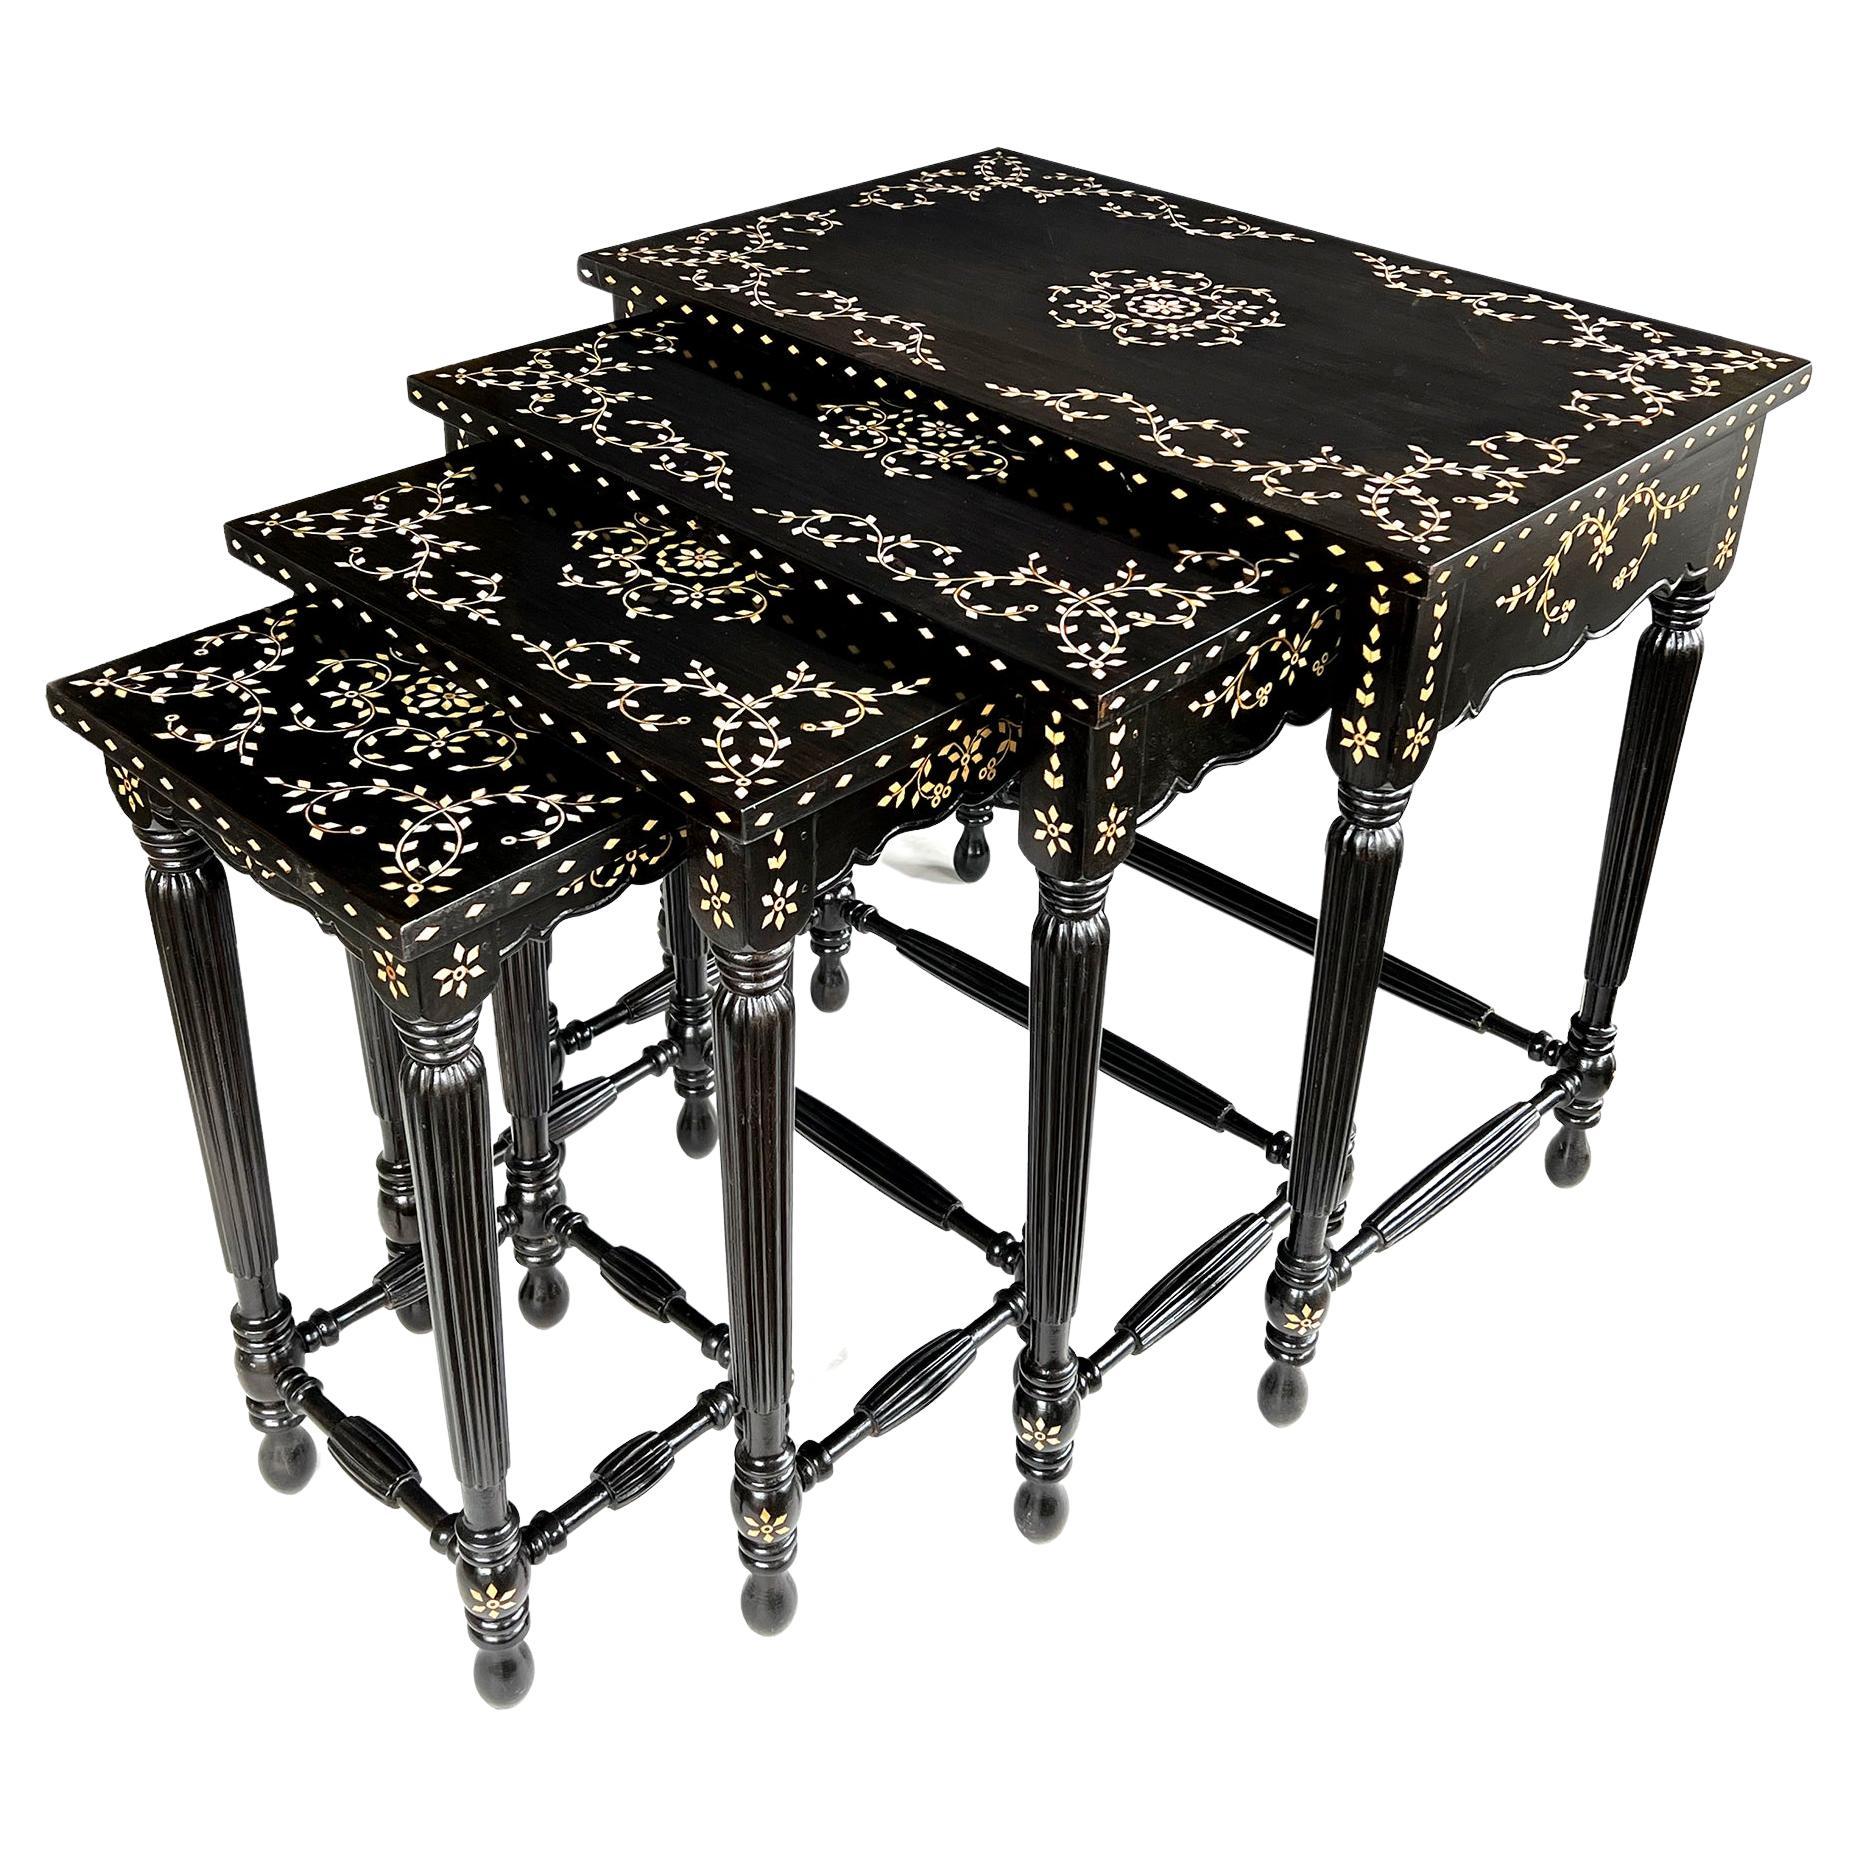 Rare Set of 4 Anglo Indian Inlaid and Ebonized Wood Nesting Tables